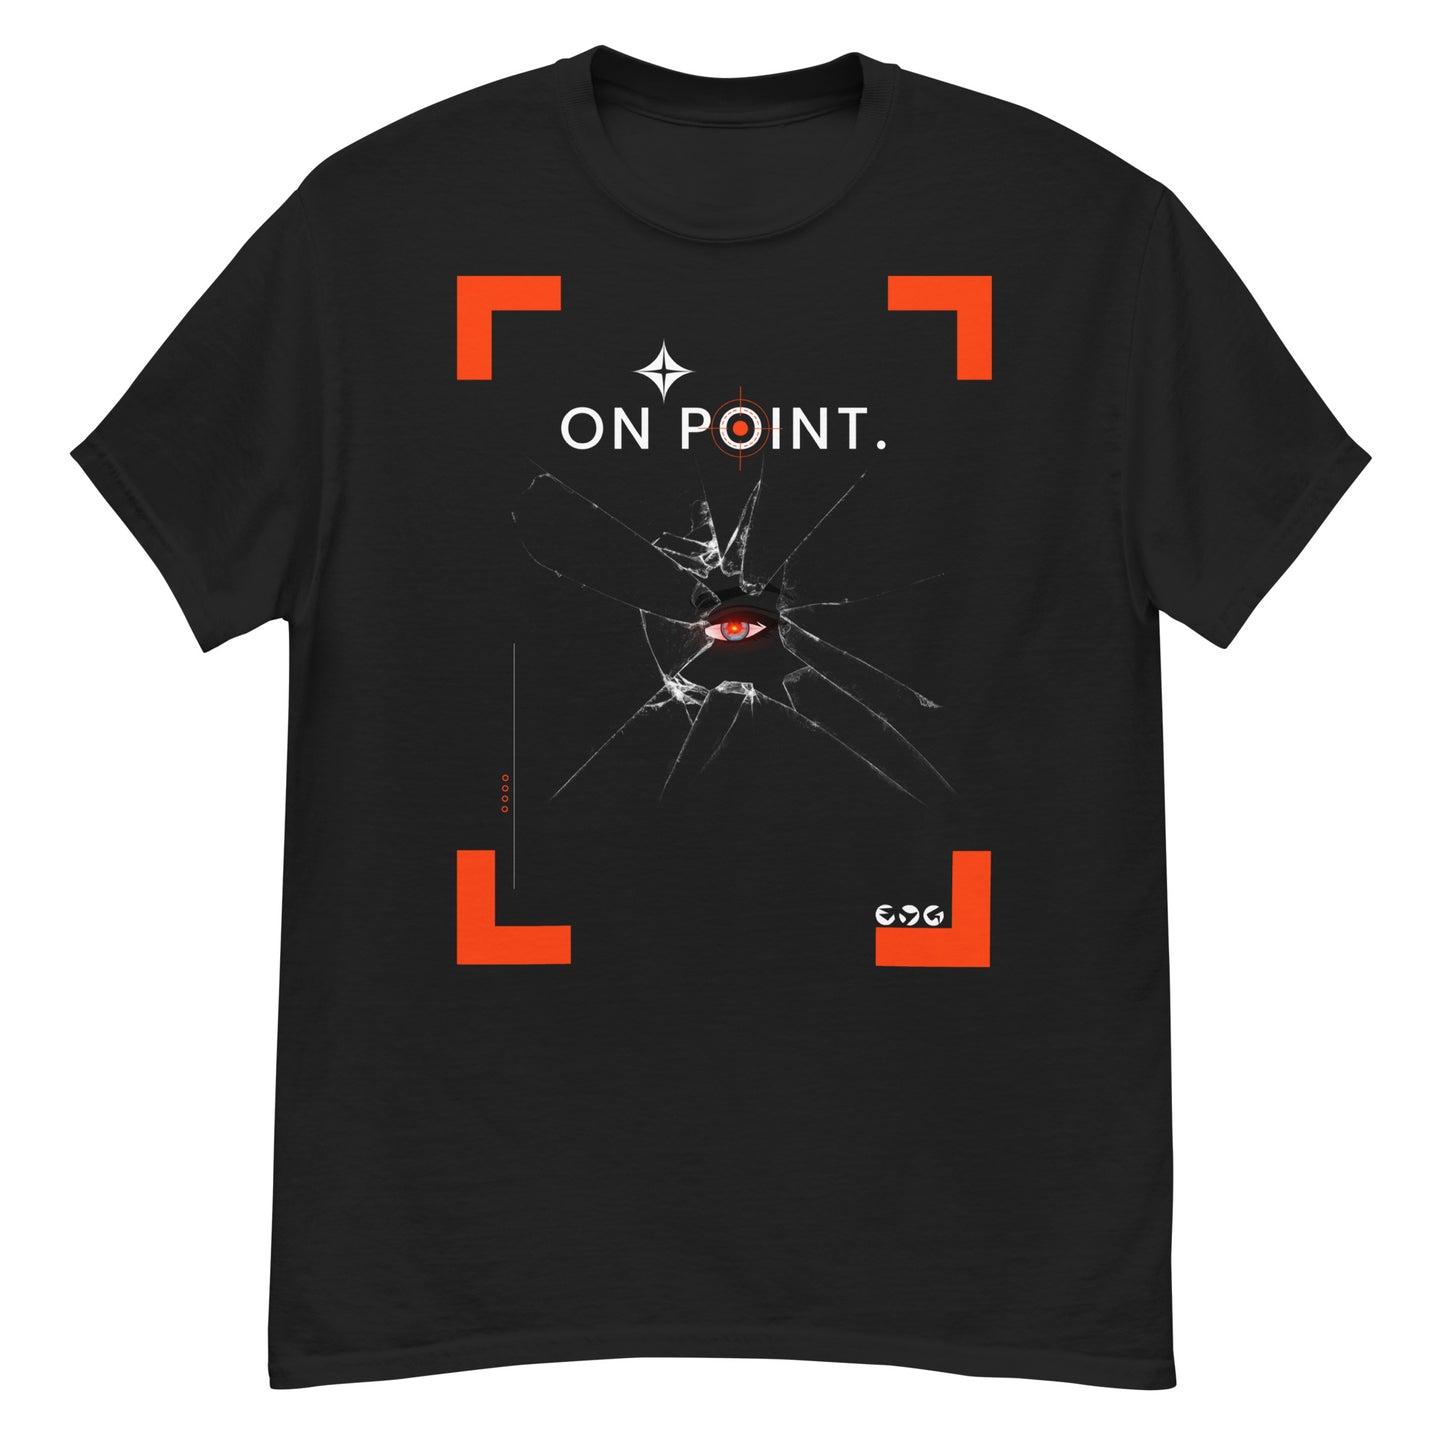 On Point classic tee